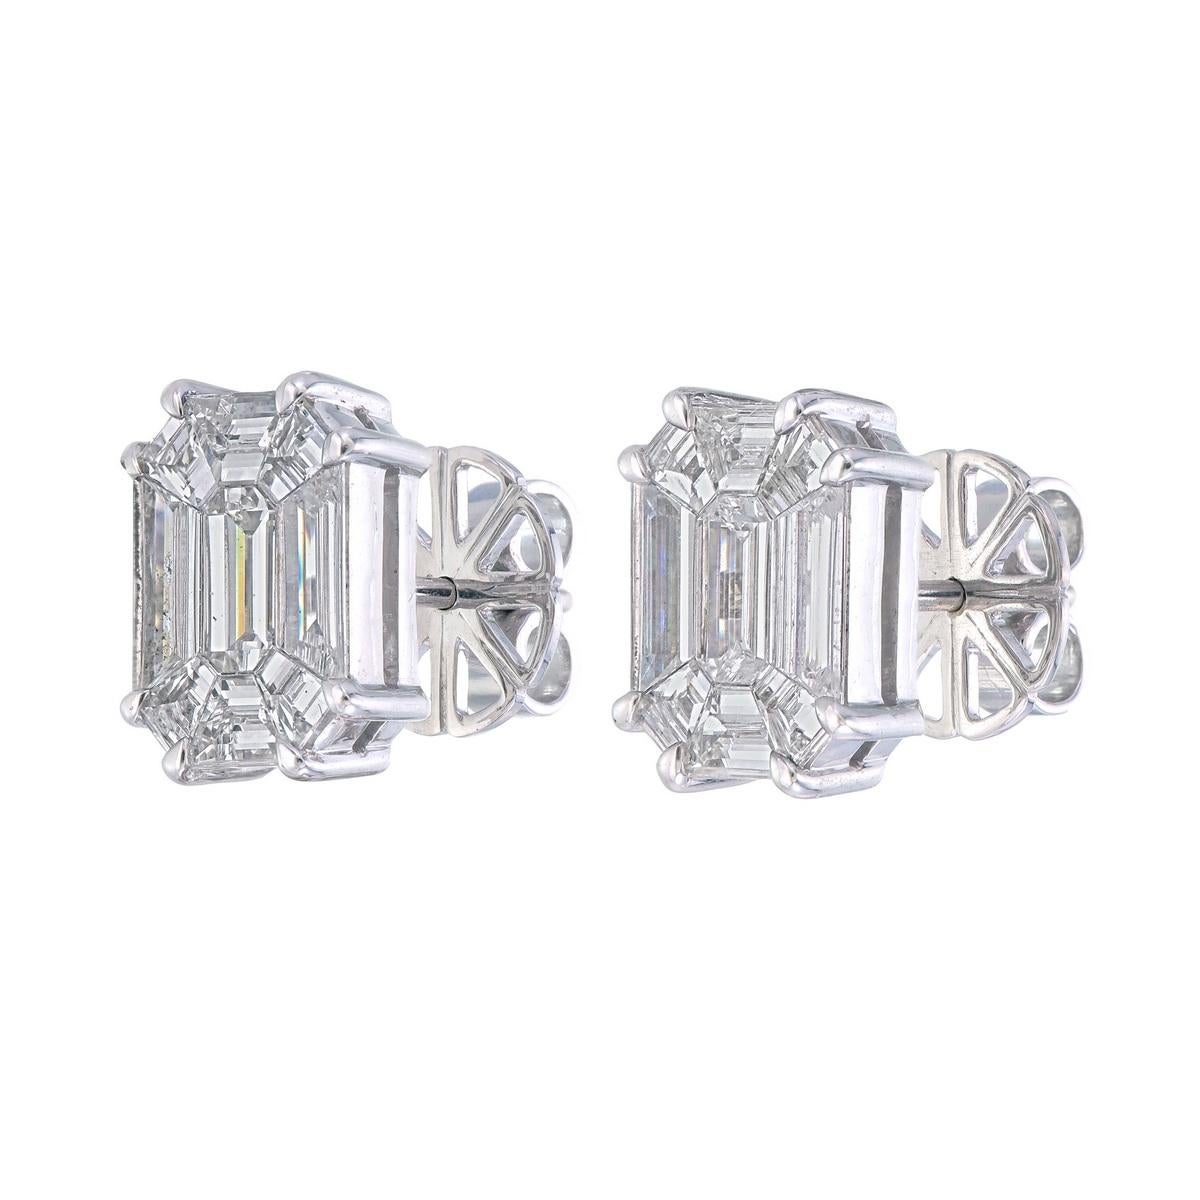 Easy on ears.
Extremely light on ears
A 10 carat face up with claw prongs is a good size for daily wear/ office wear /evening wear.

A 10 carat Emerald cut diamond pair costs 10 times the price of these earrings & this gives you a great look compare